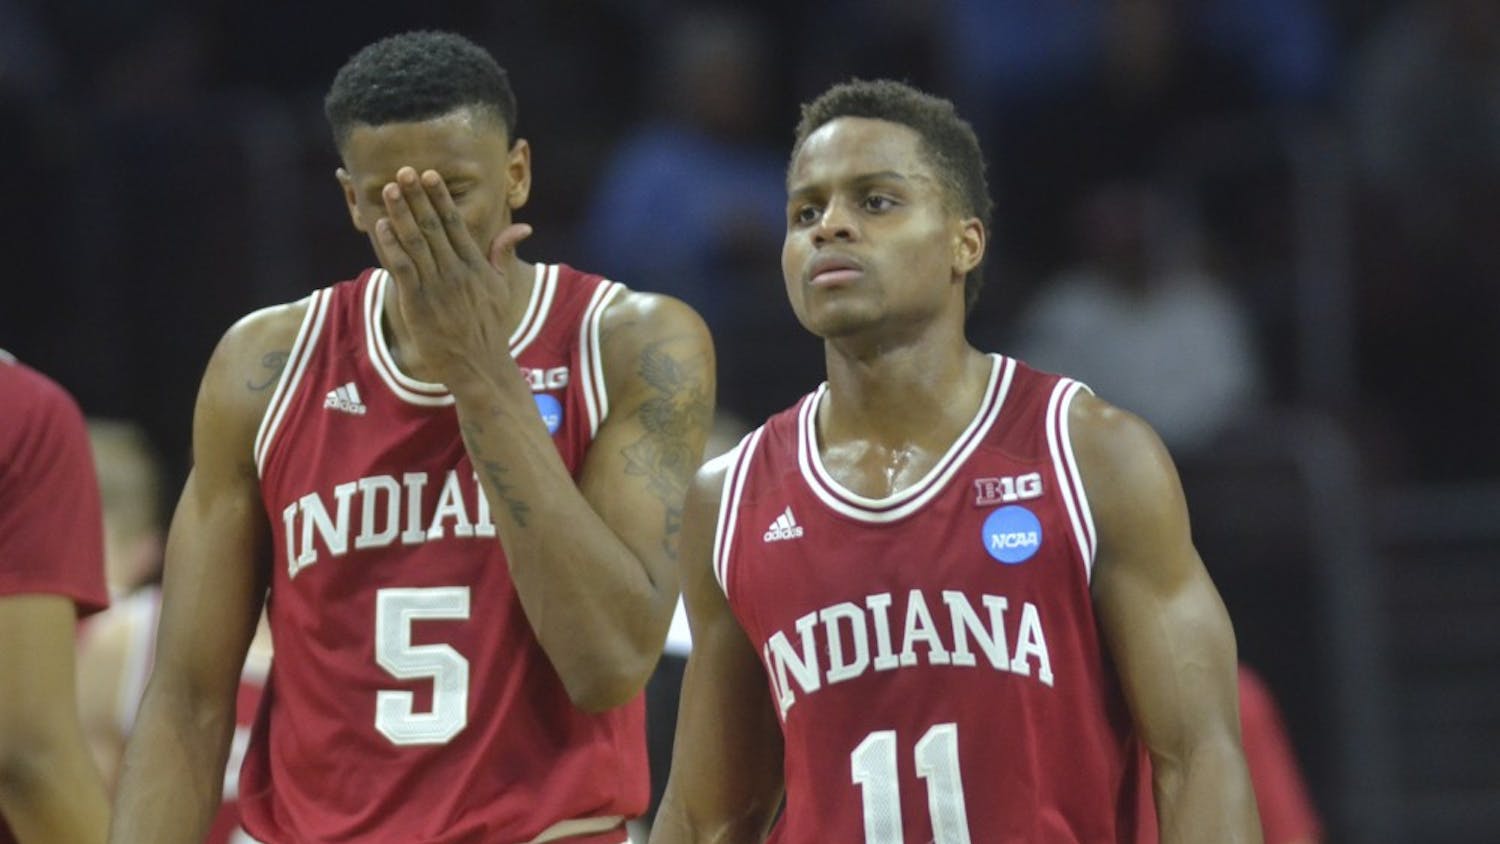  Senior guard Yogi Ferrell and junior guard Troy Williams walk back to the court after a timeout during the second half of the Sweet Sixteen game against number one seed North Carolina on . The Hoosiers lost 101-86.
